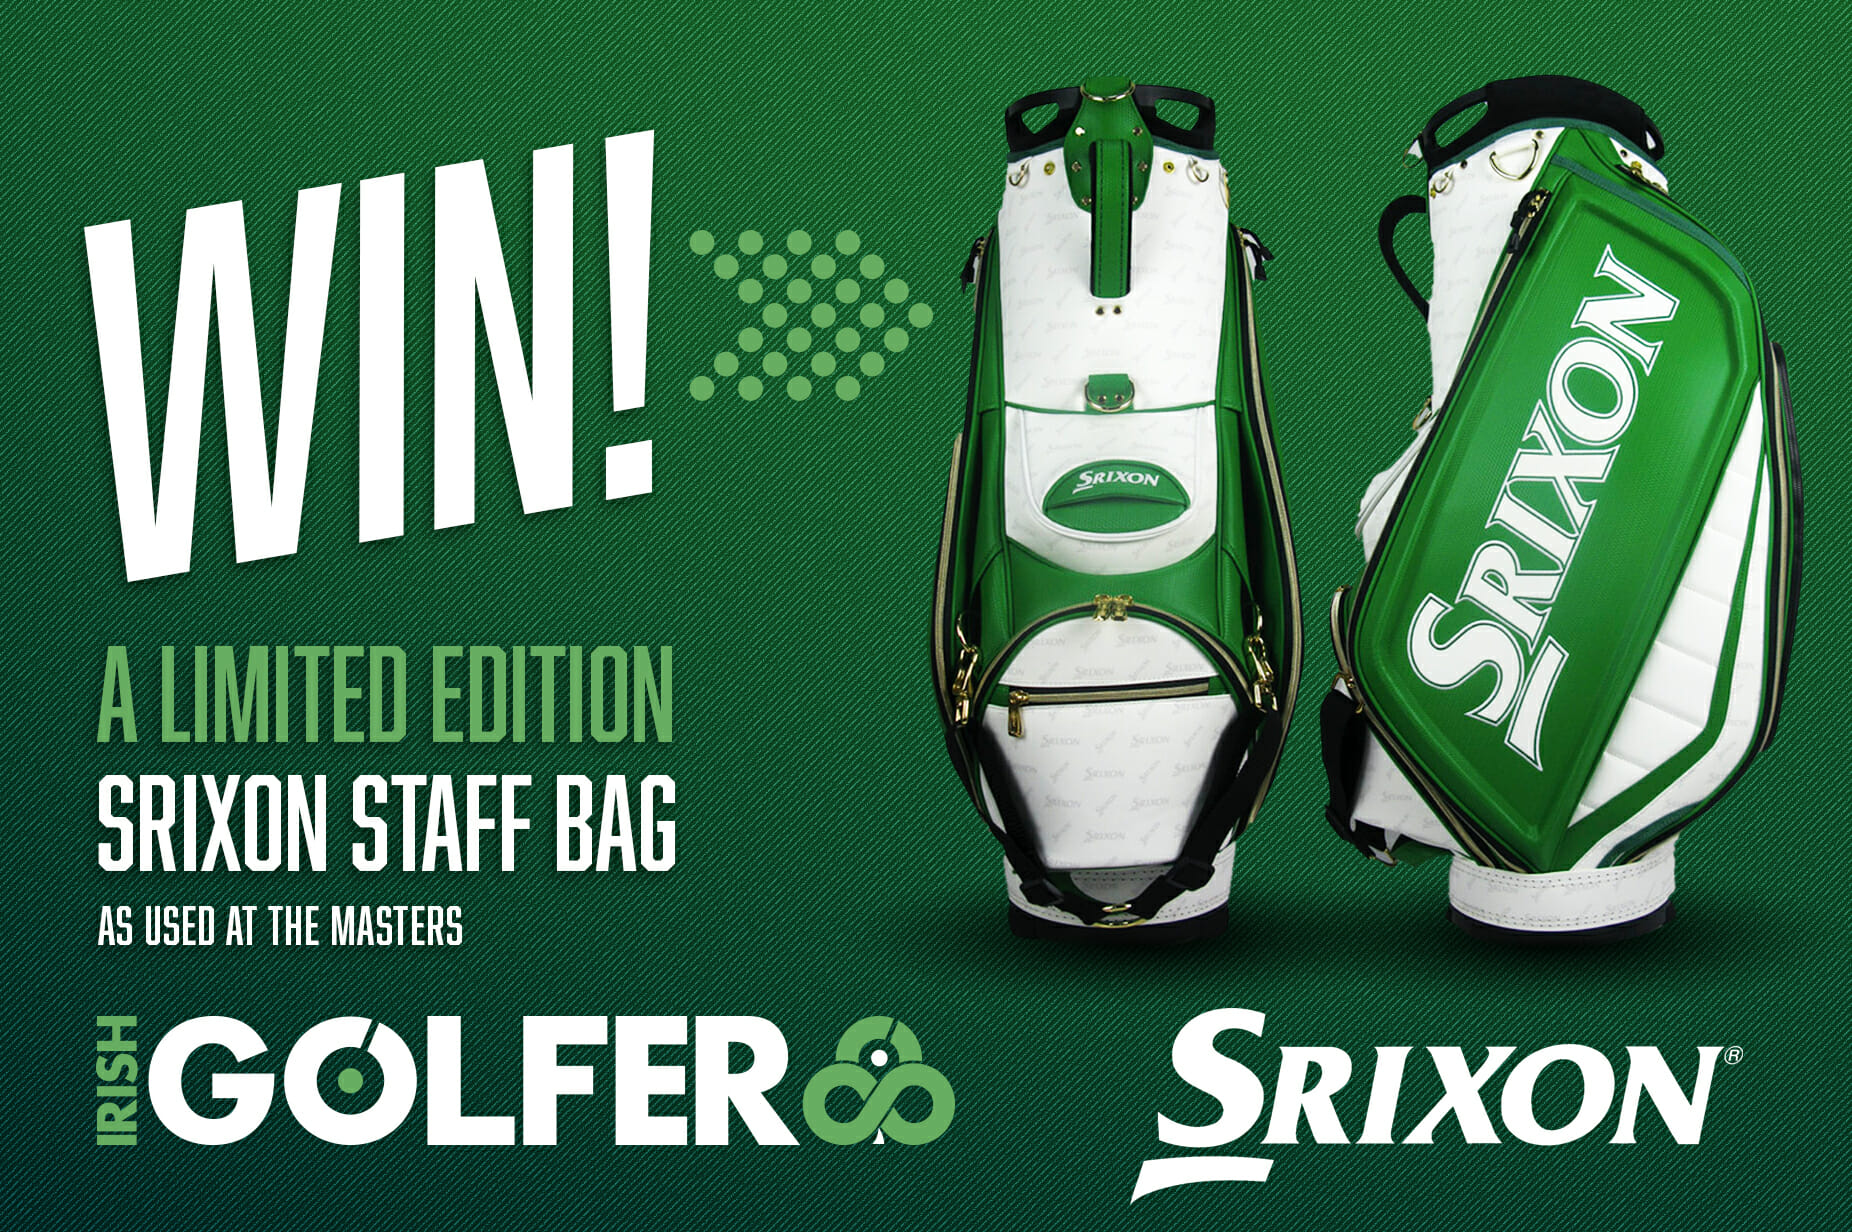 WIN a limited edition Srixon Tour Bag as used by Shane Lowry at the Masters